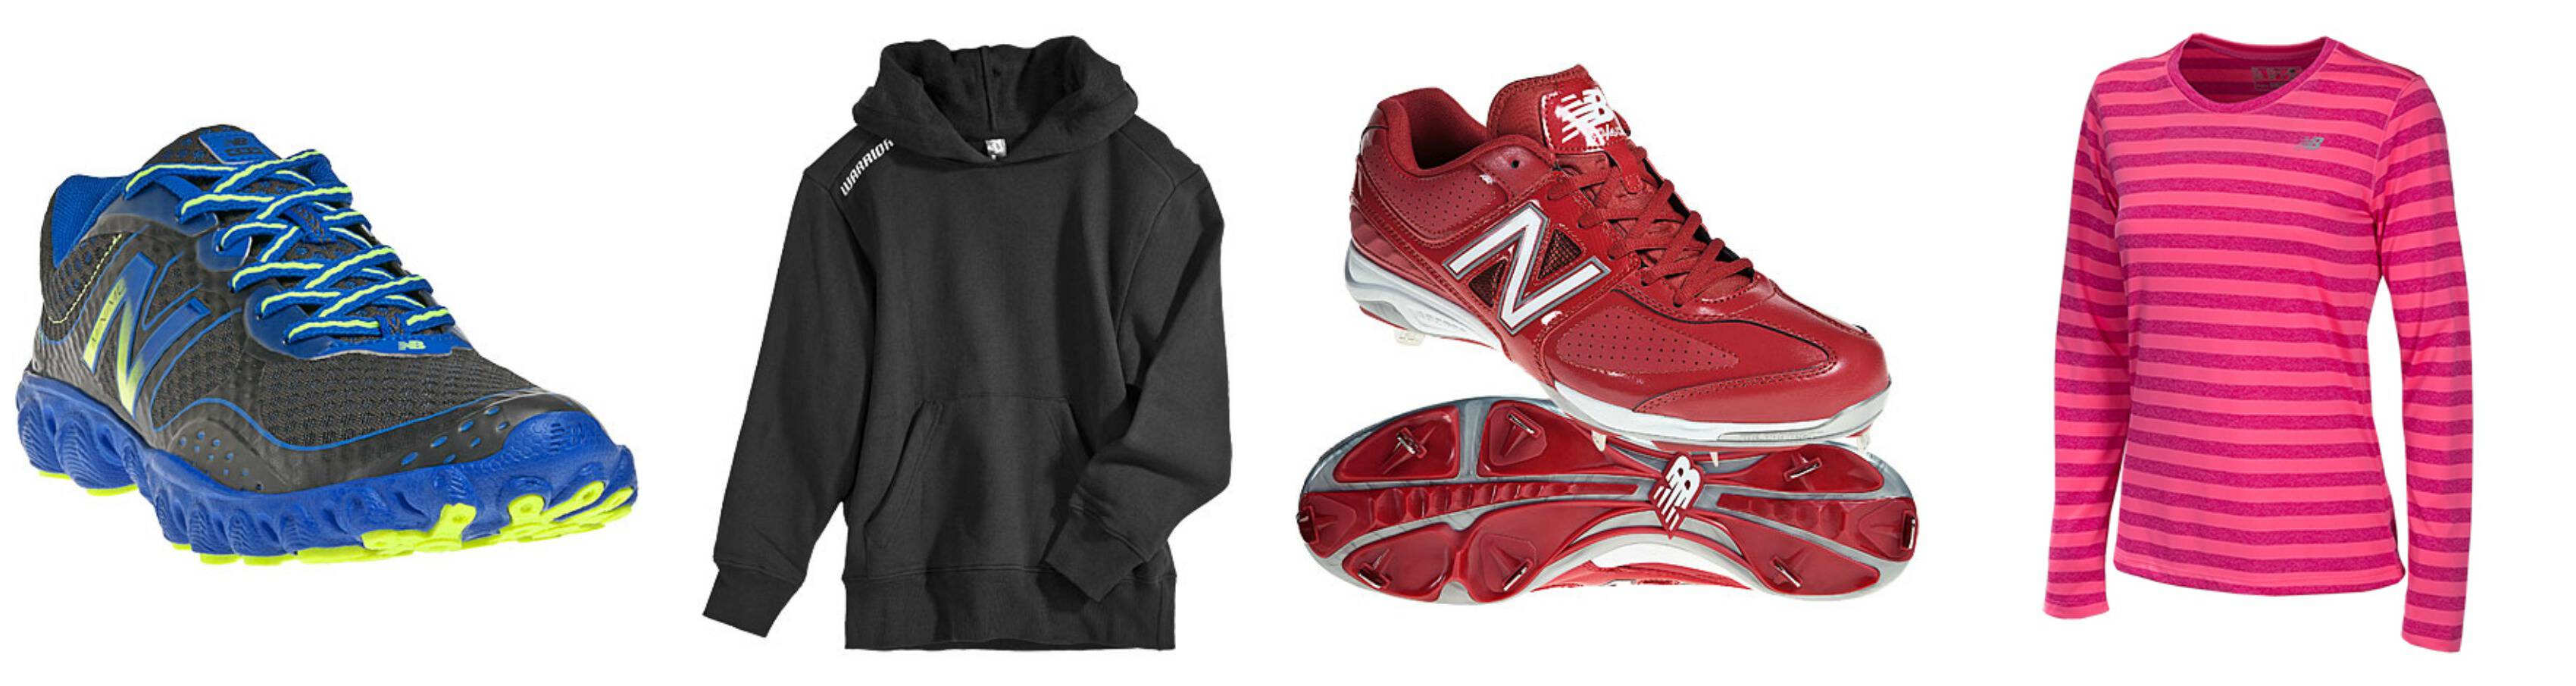 New Balance Outlet Sale